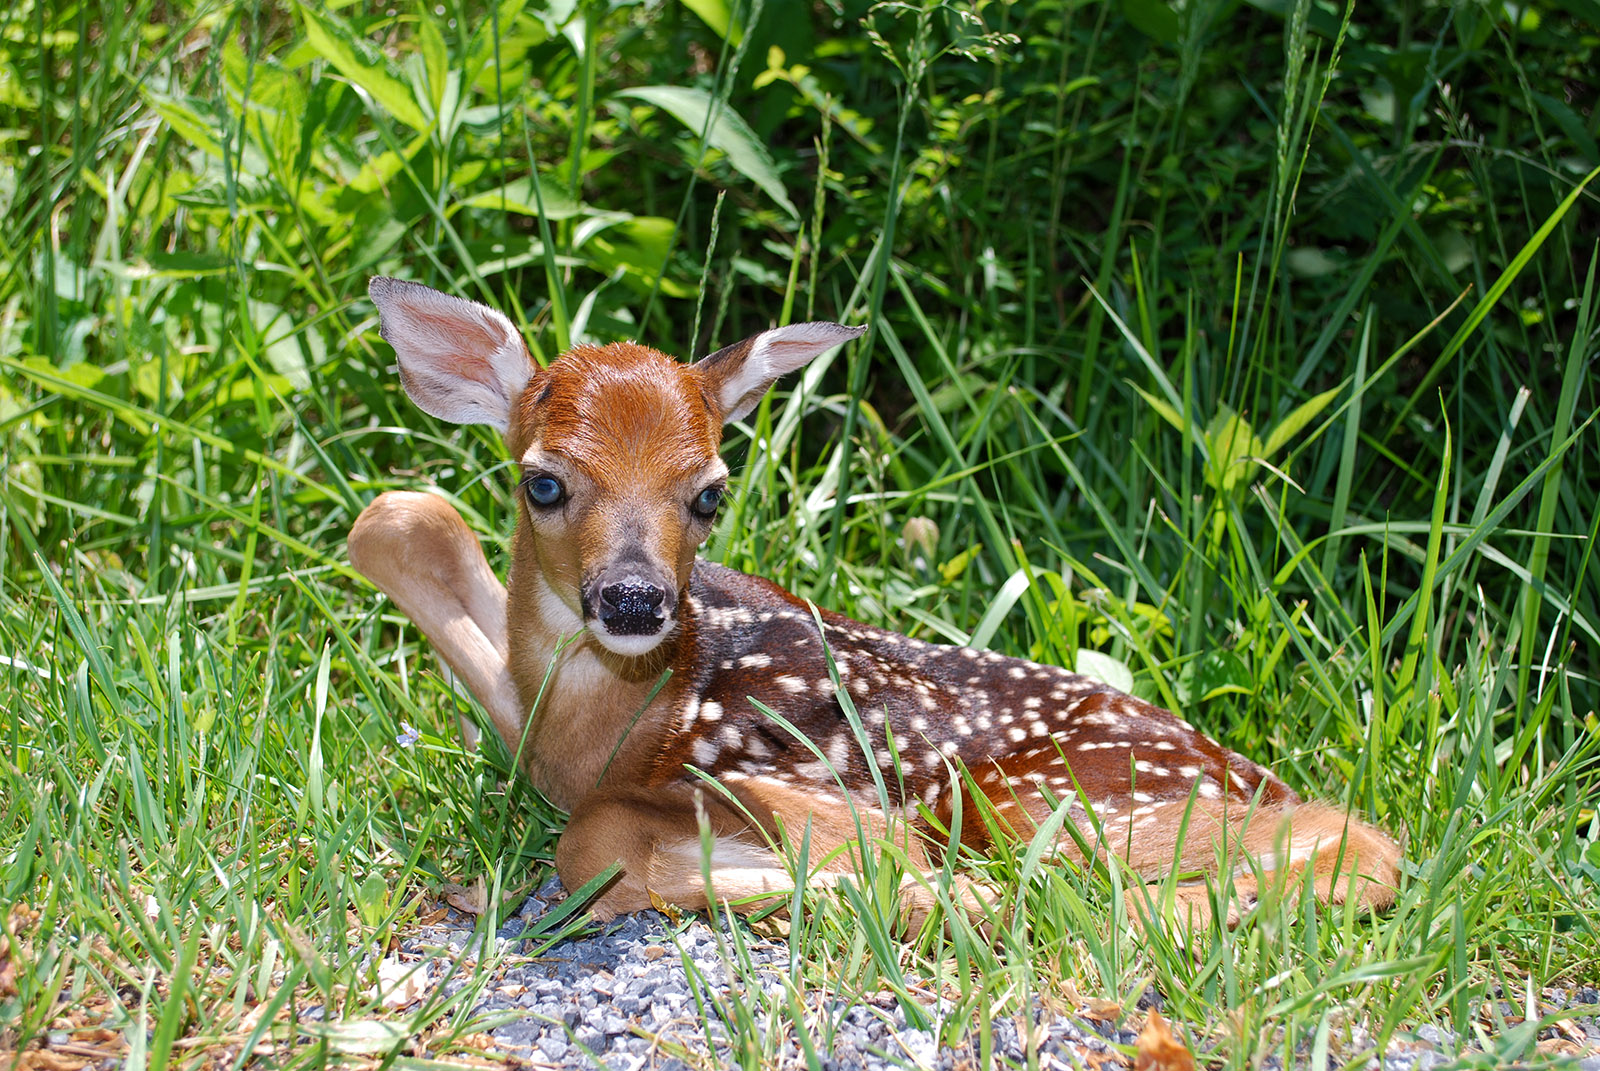 A photo of a very young fawn lying in the grass at the edge of a woods.